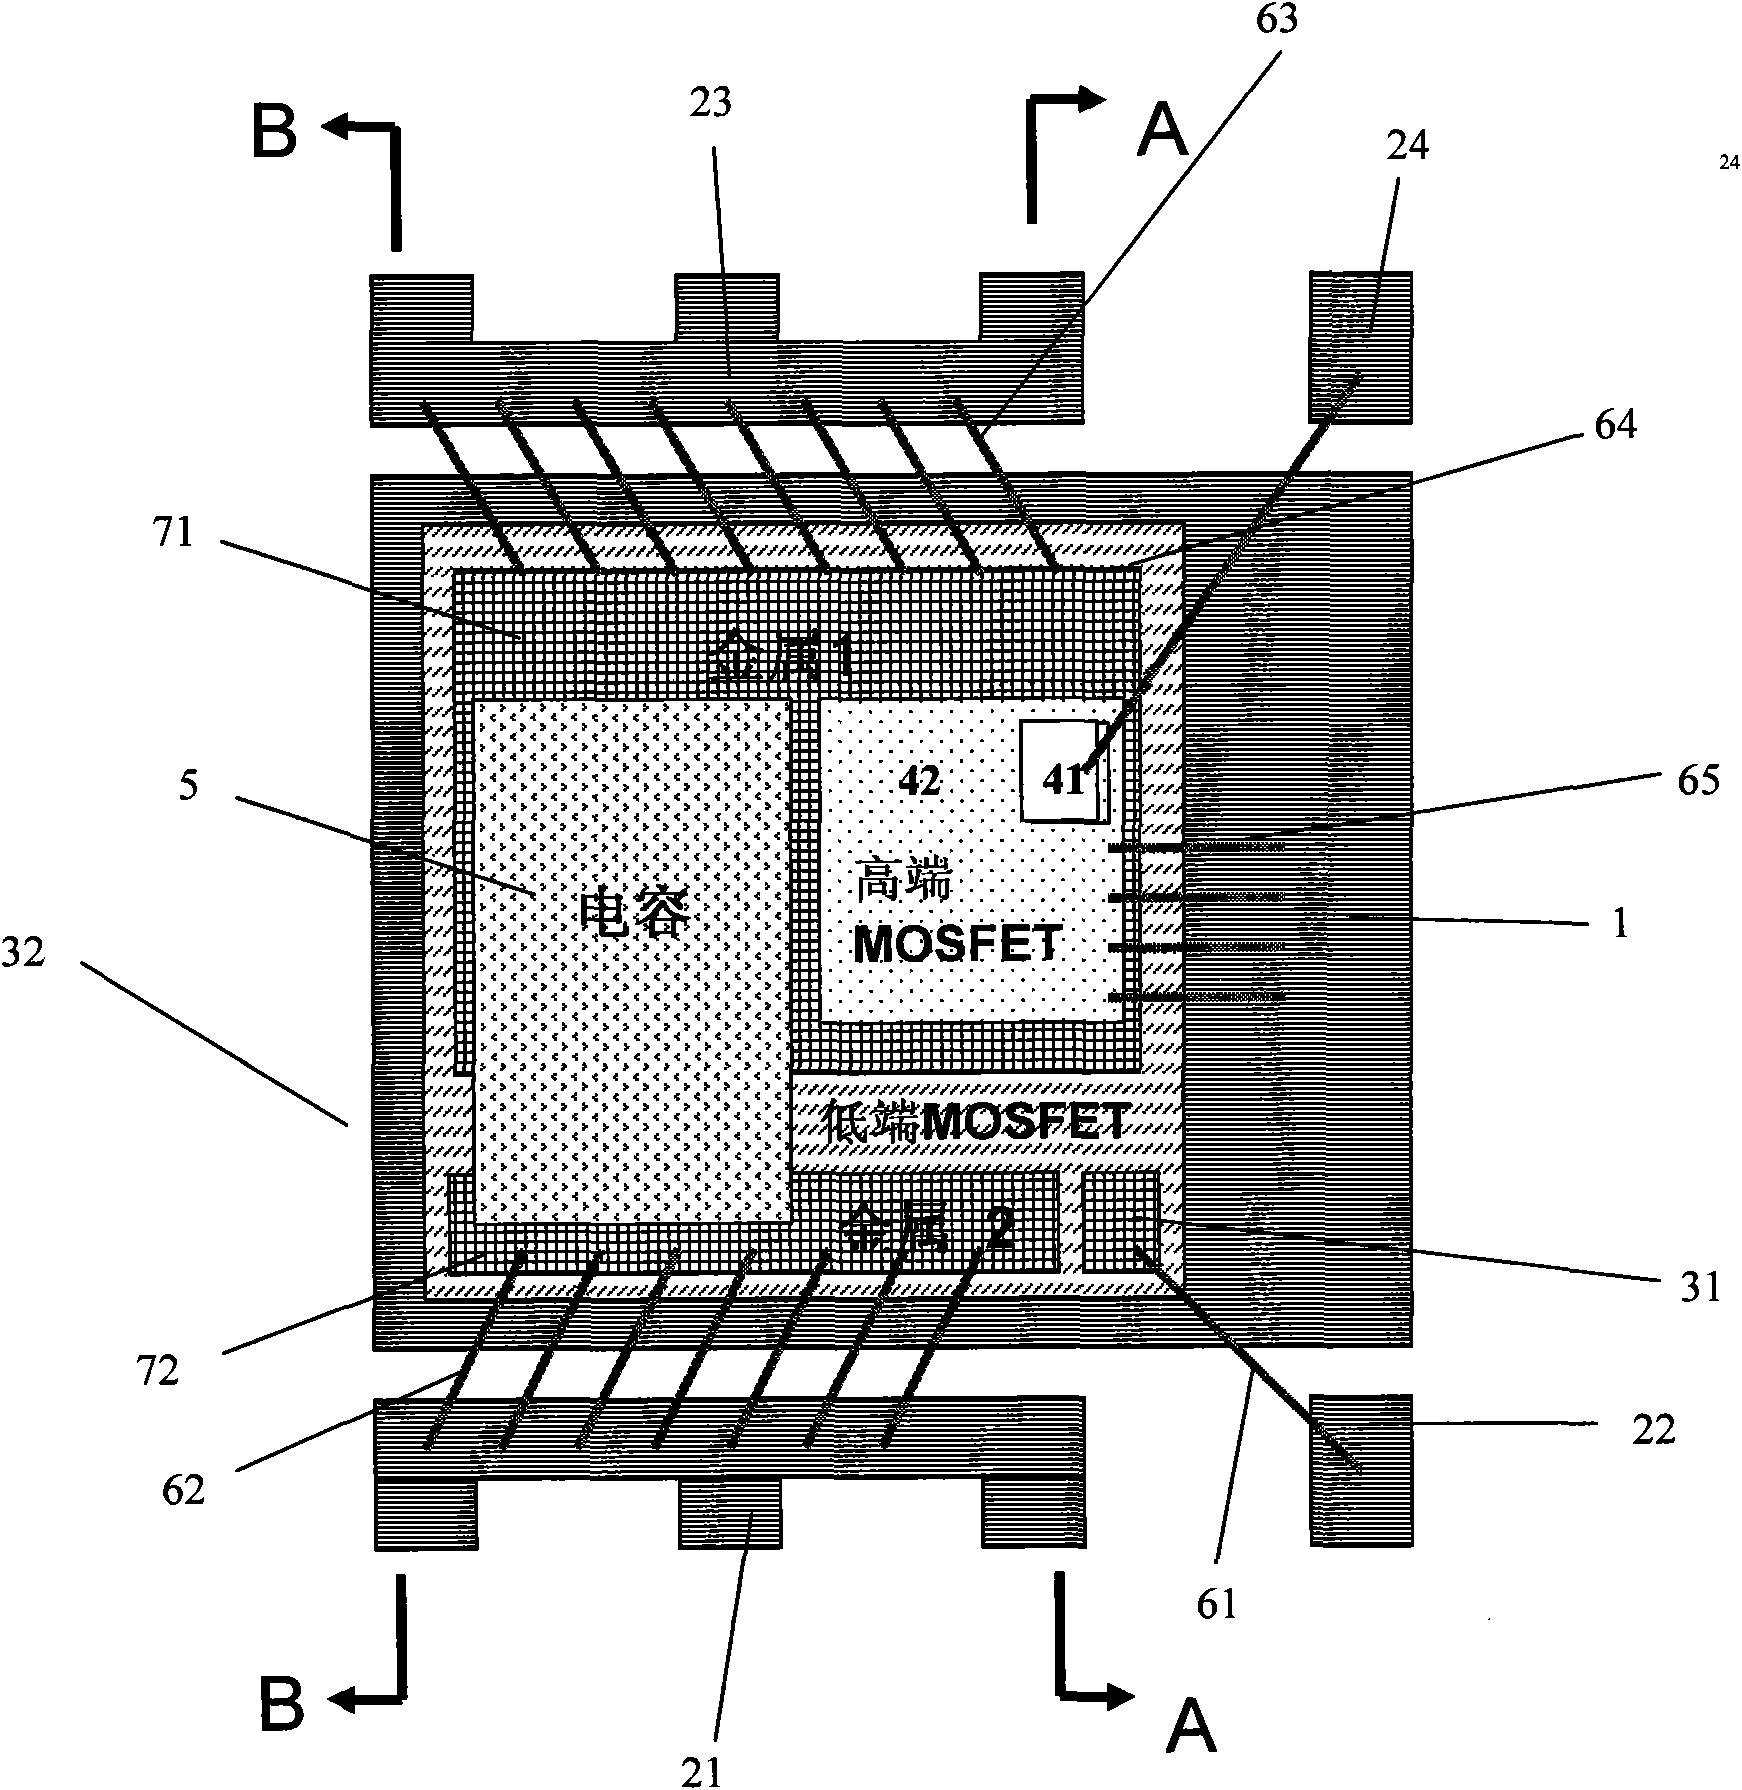 Semiconductor packing structure applied to power switcher circuit